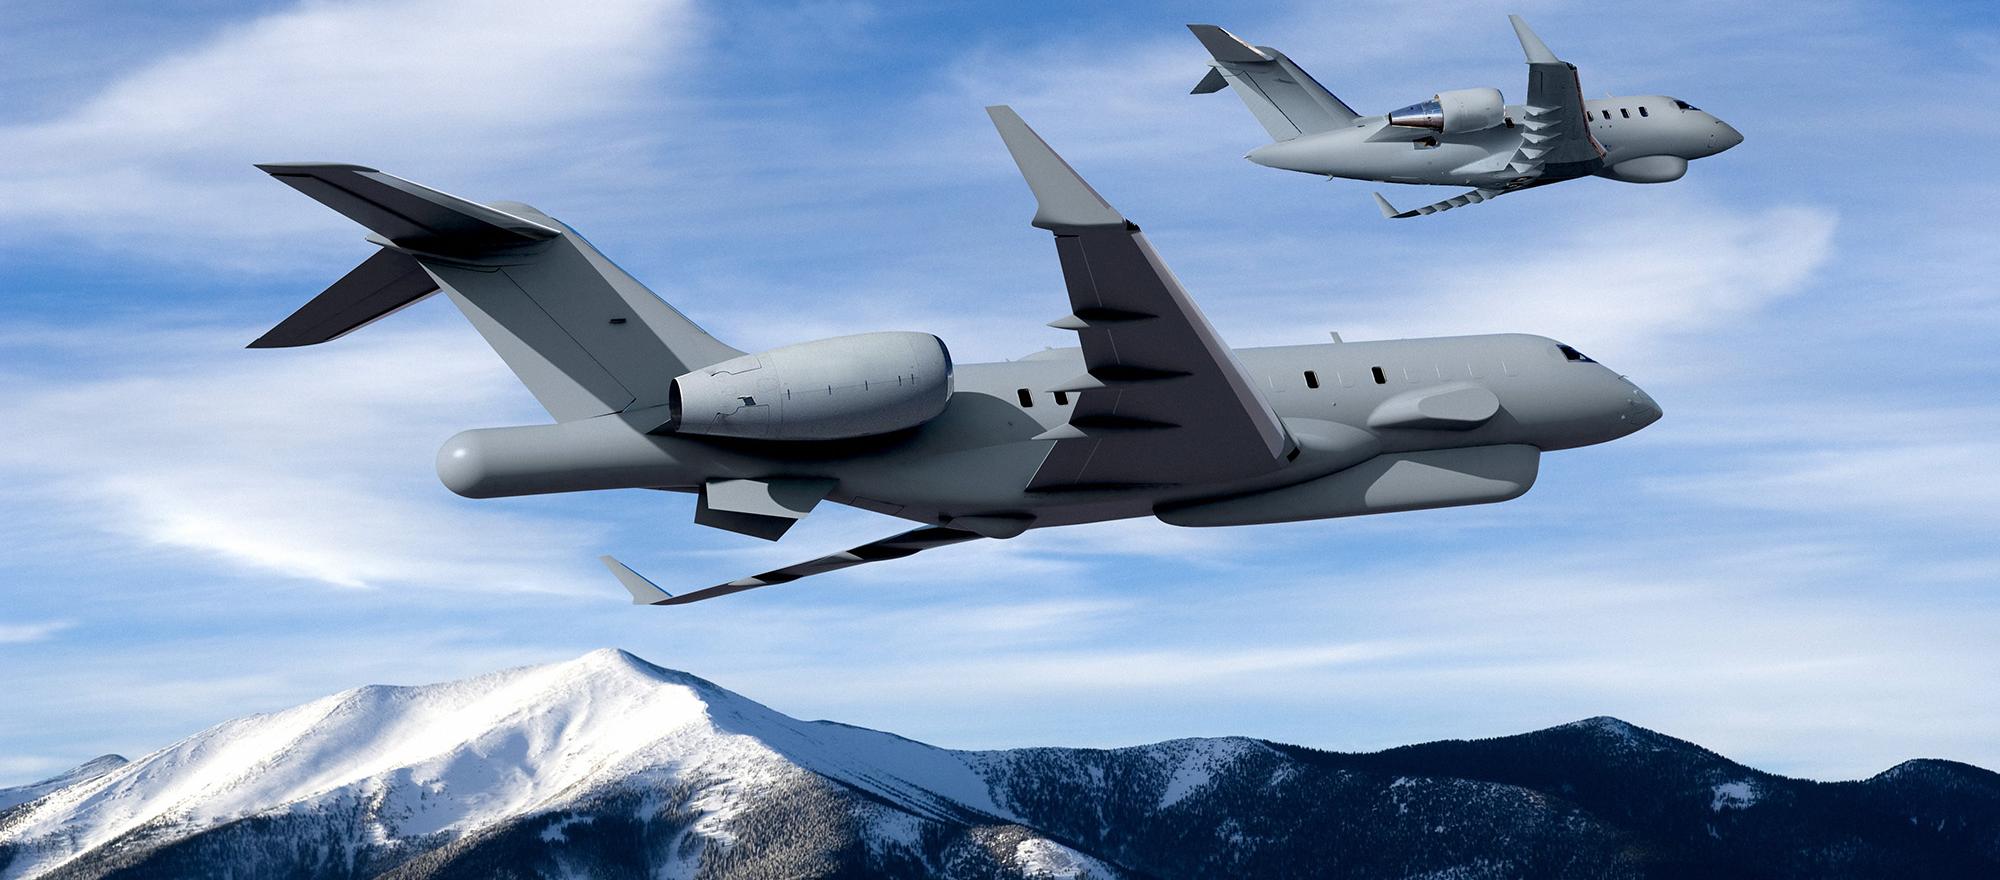 Bombardier global and challenger aircraft in defense configurations flying together